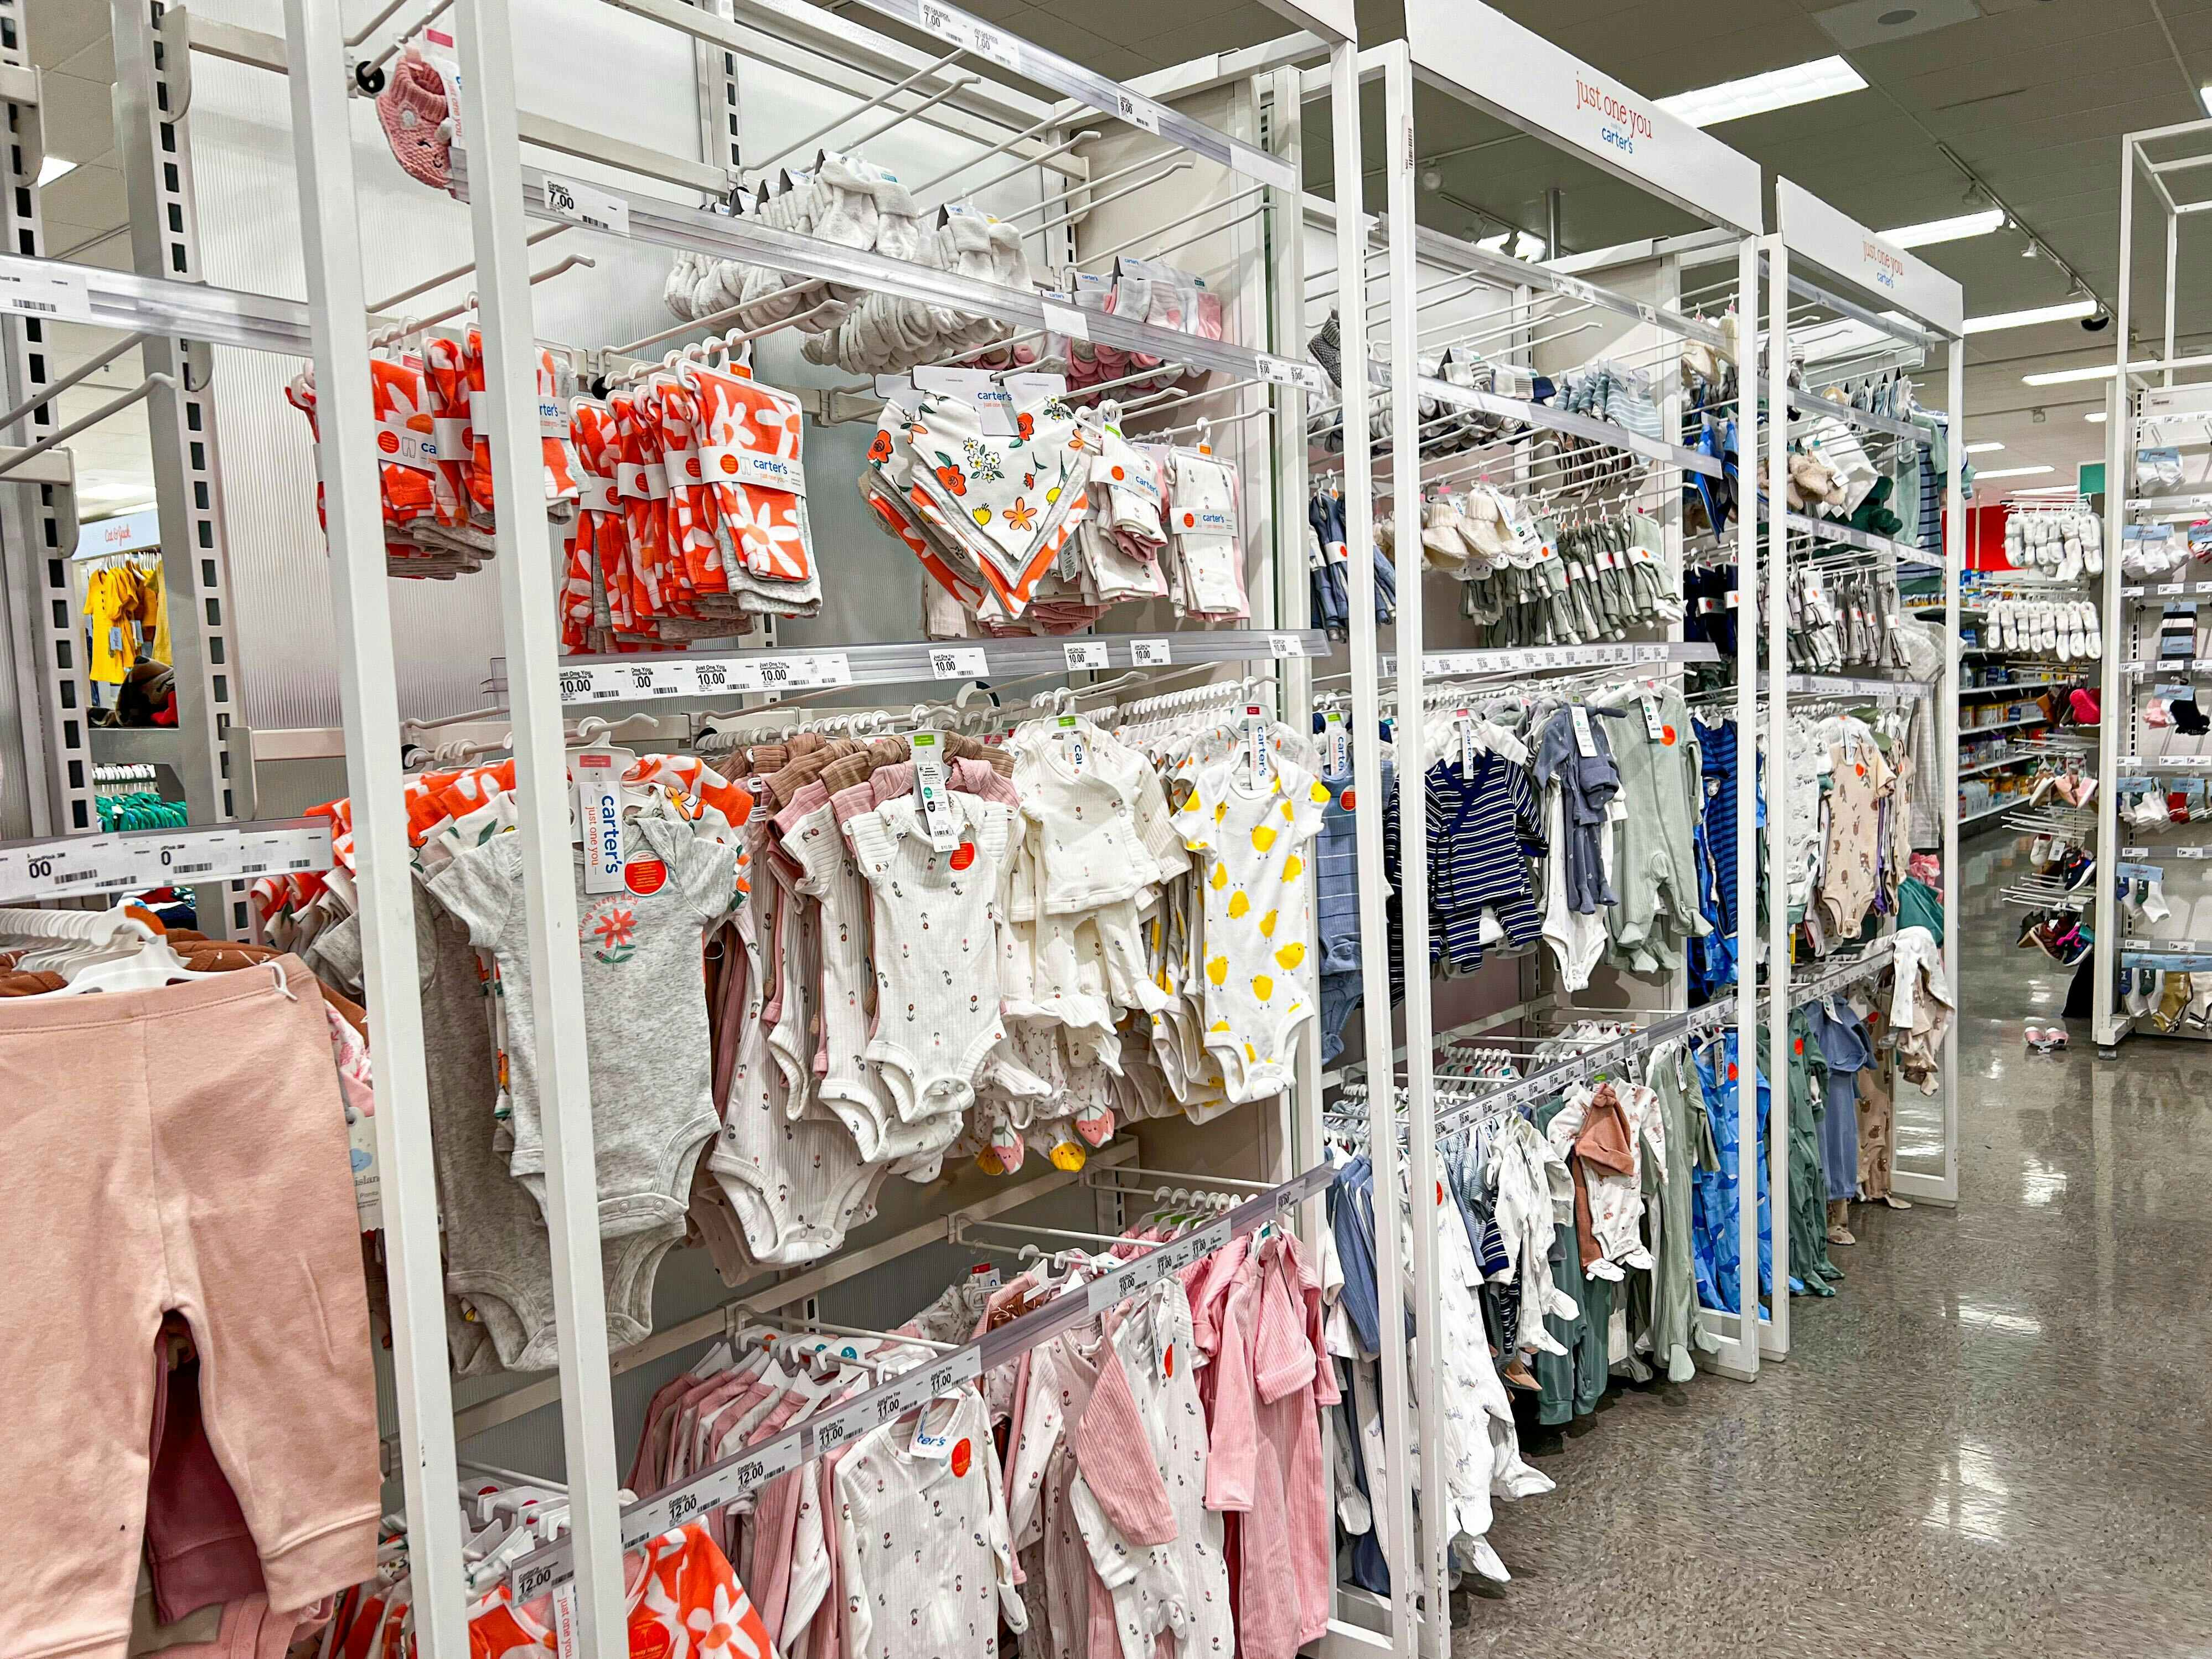 Carter's Little Planet Apparel on Clearance for 50% Off at Target